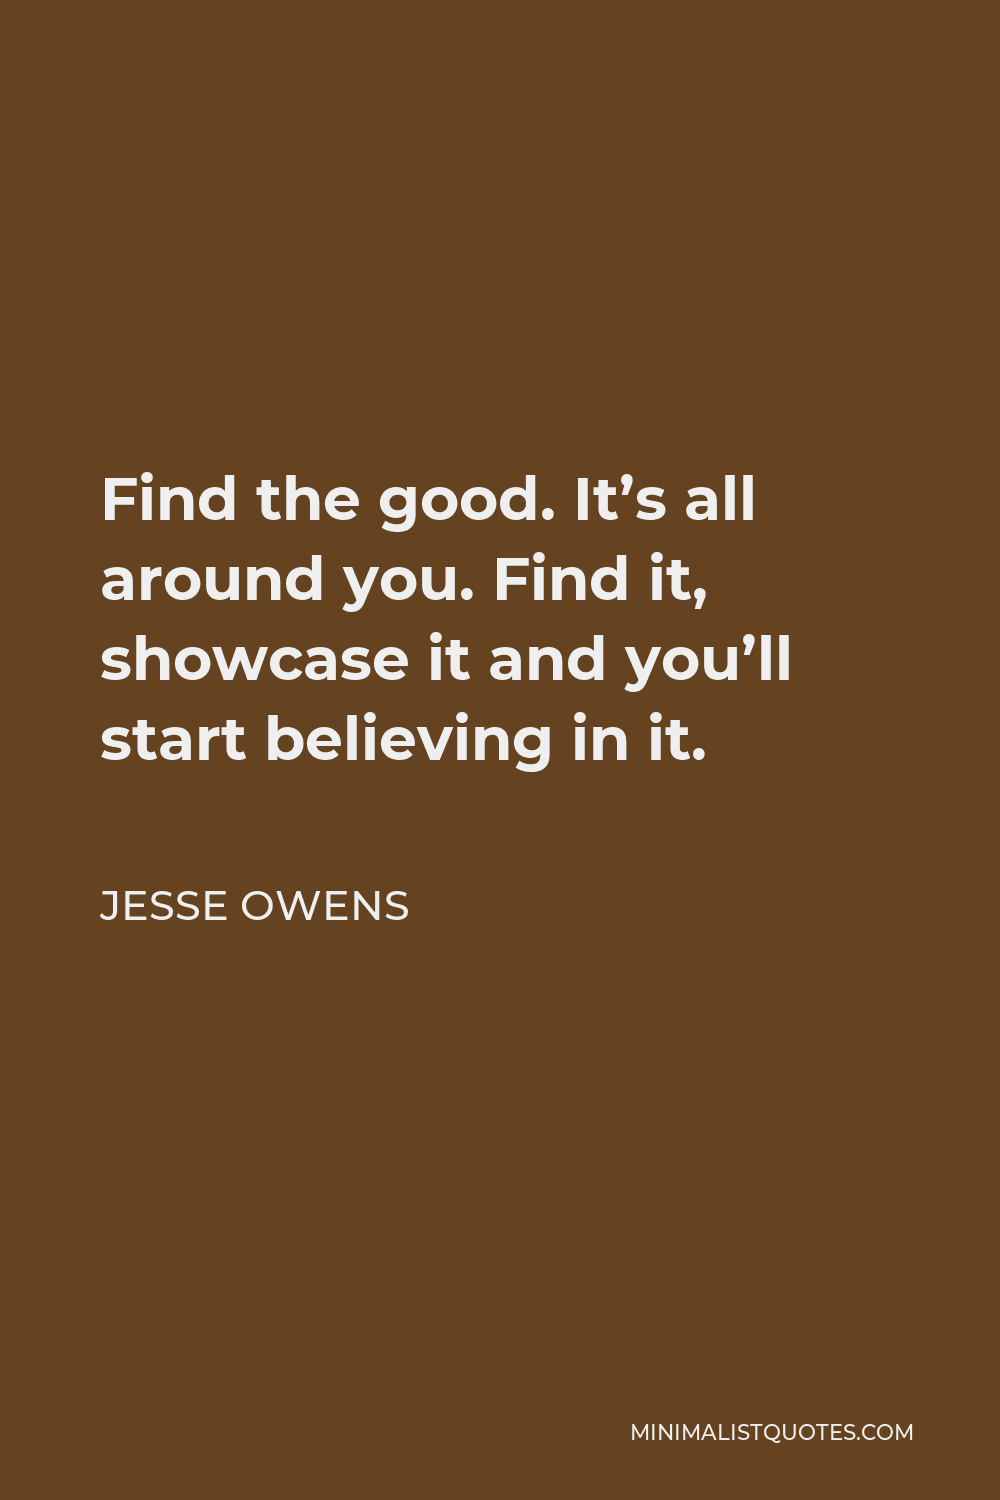 Jesse Owens Quote - Find the good. It’s all around you. Find it, showcase it and you’ll start believing in it.